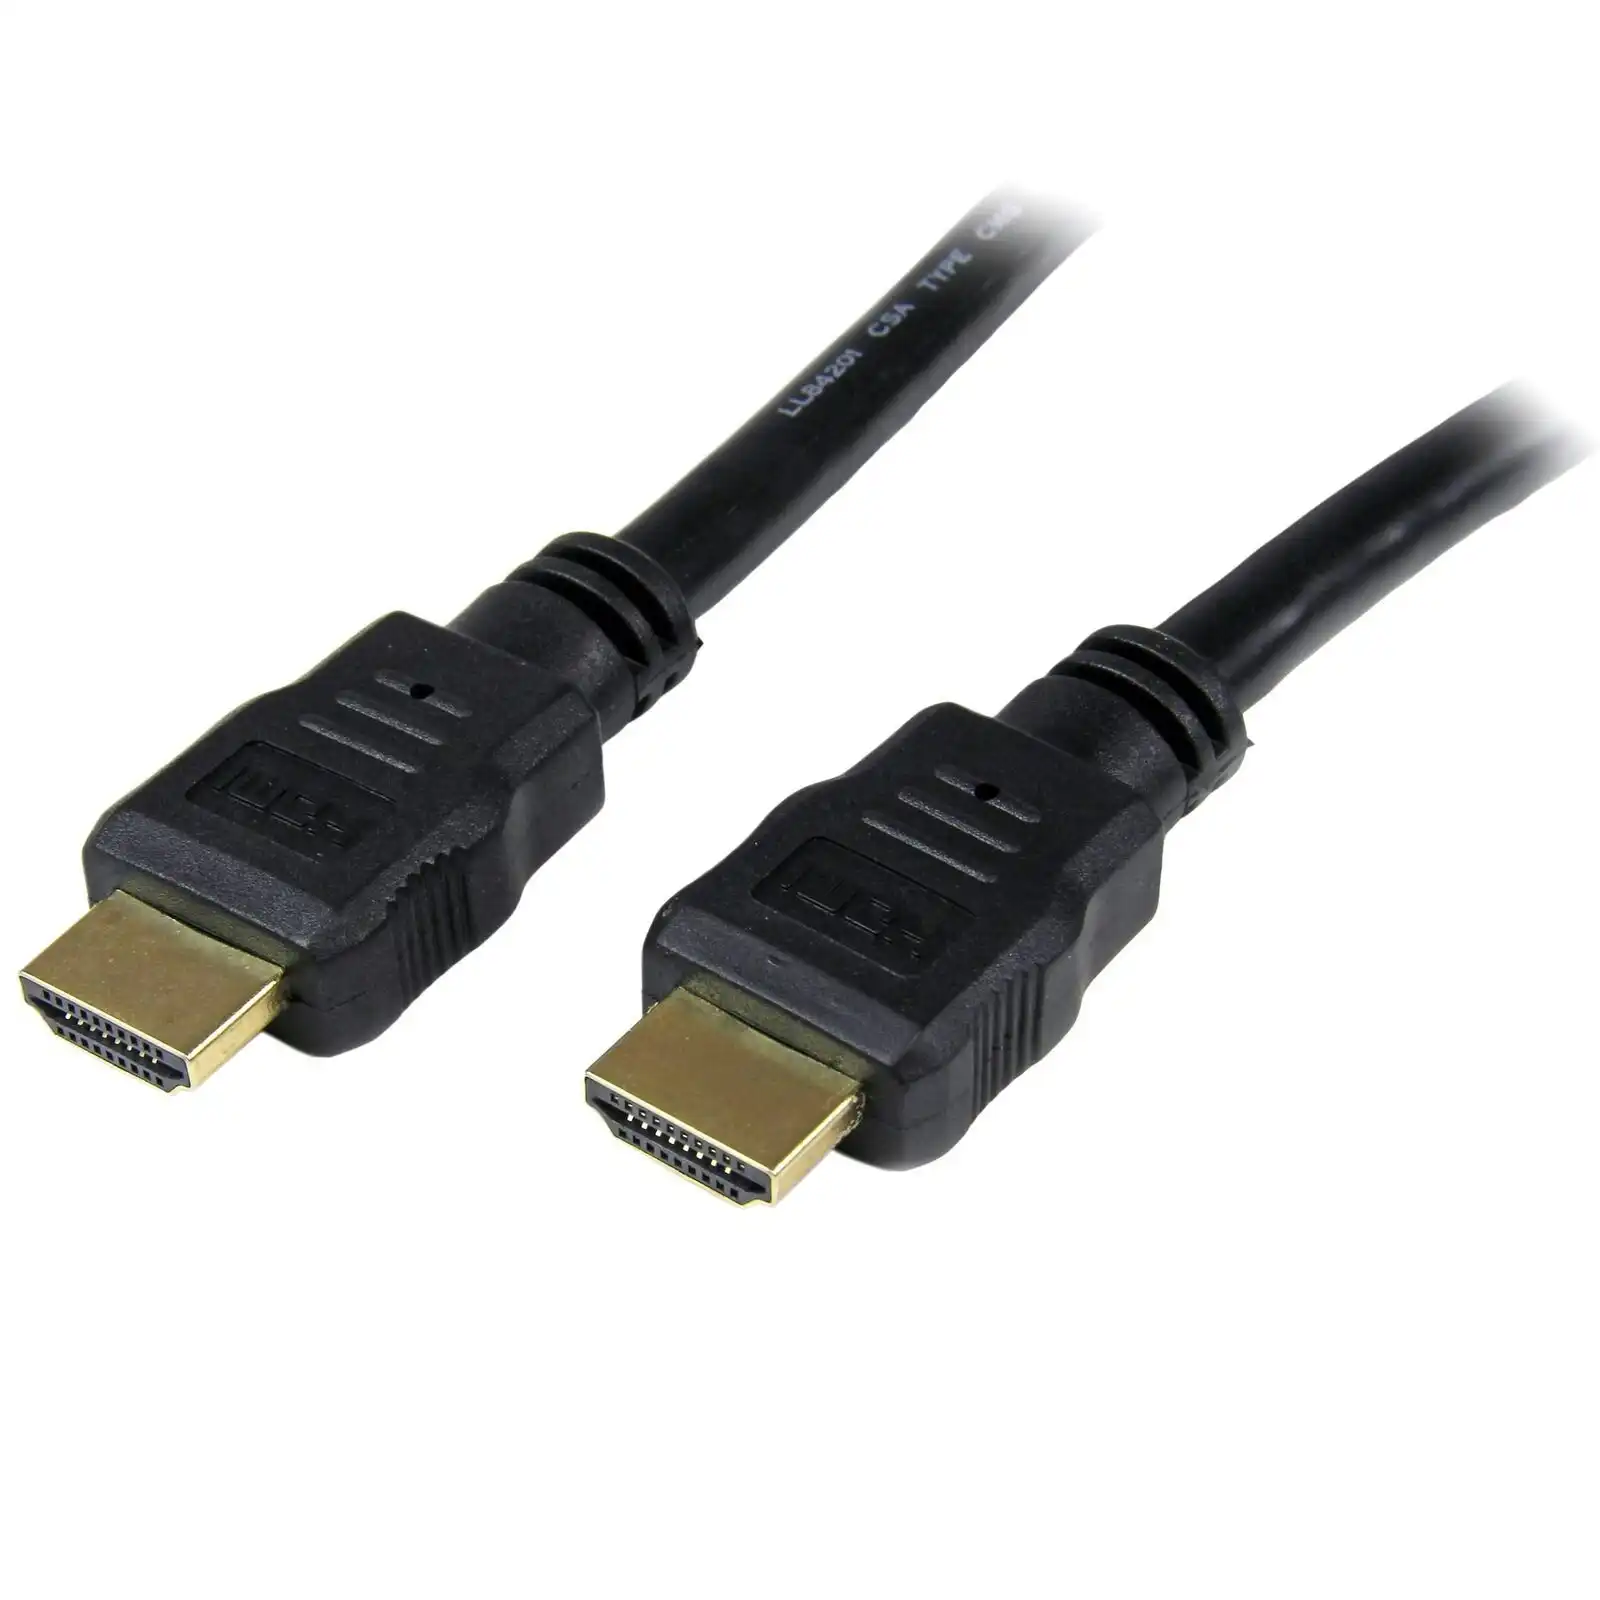 Star Tech 2M 4K/2K UHD Male/Male HDMI 1.4 Cable w/ Ethernet for HDTV/DVD Black